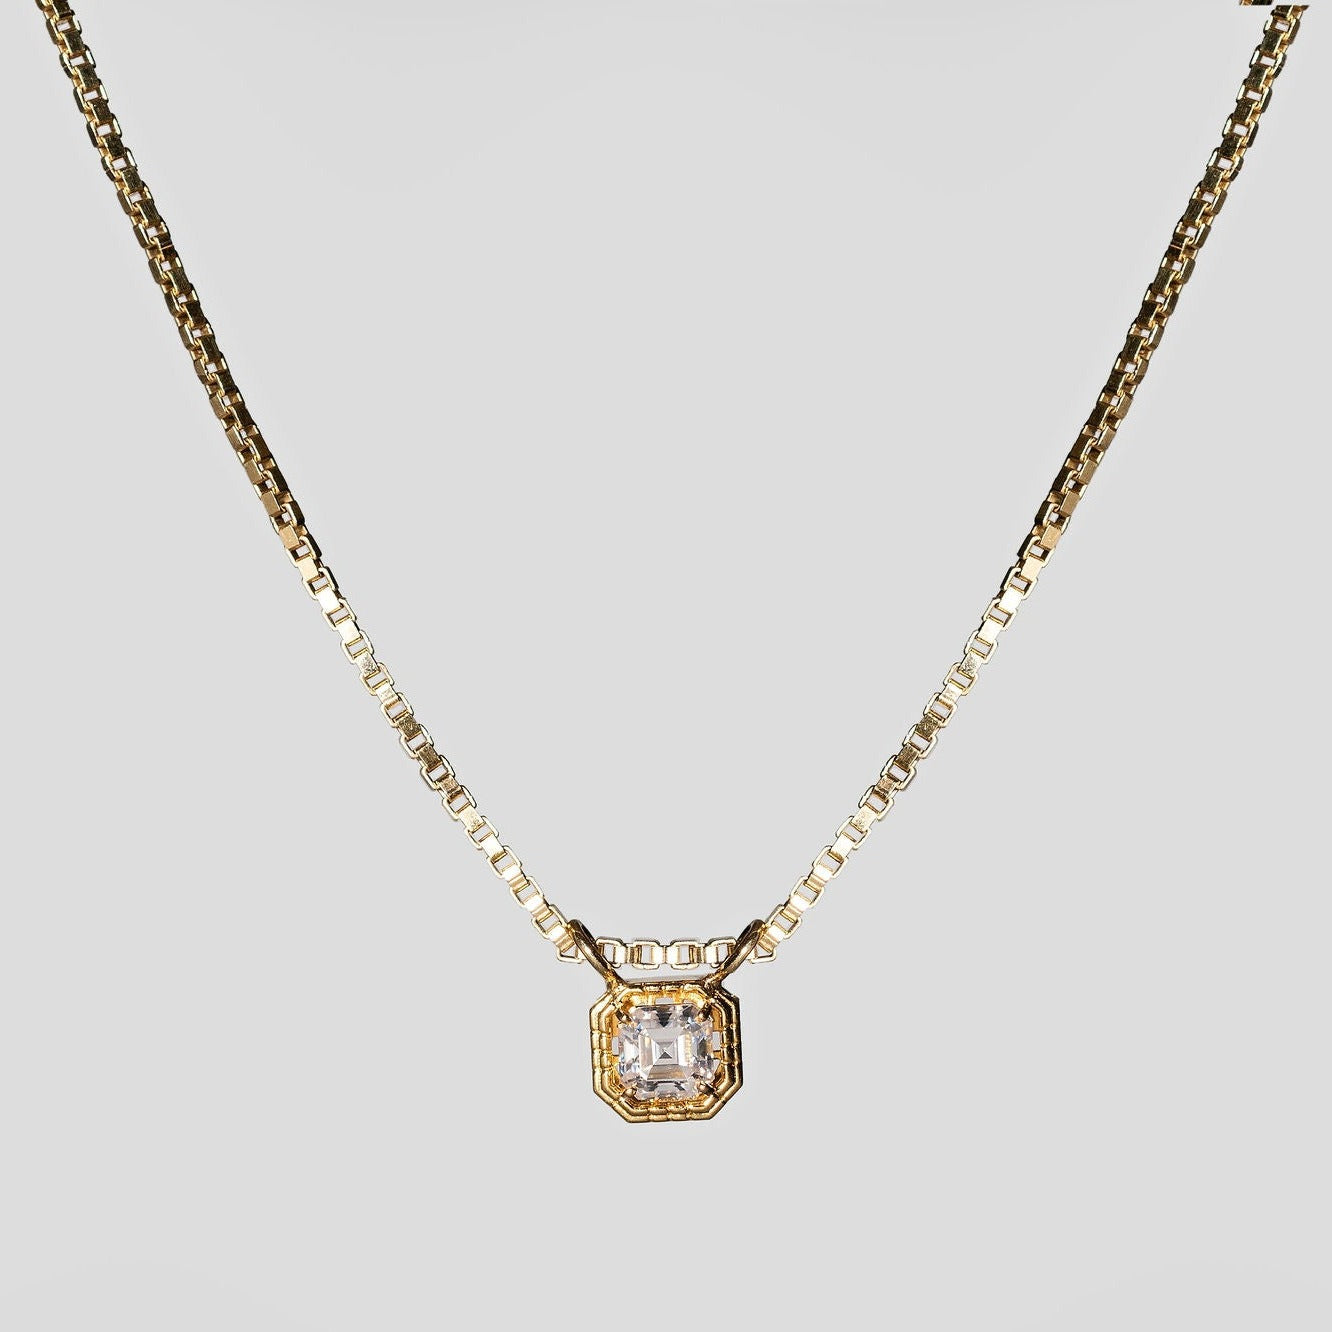 1ct Square Pendant Necklace - 14k Yellow Gold